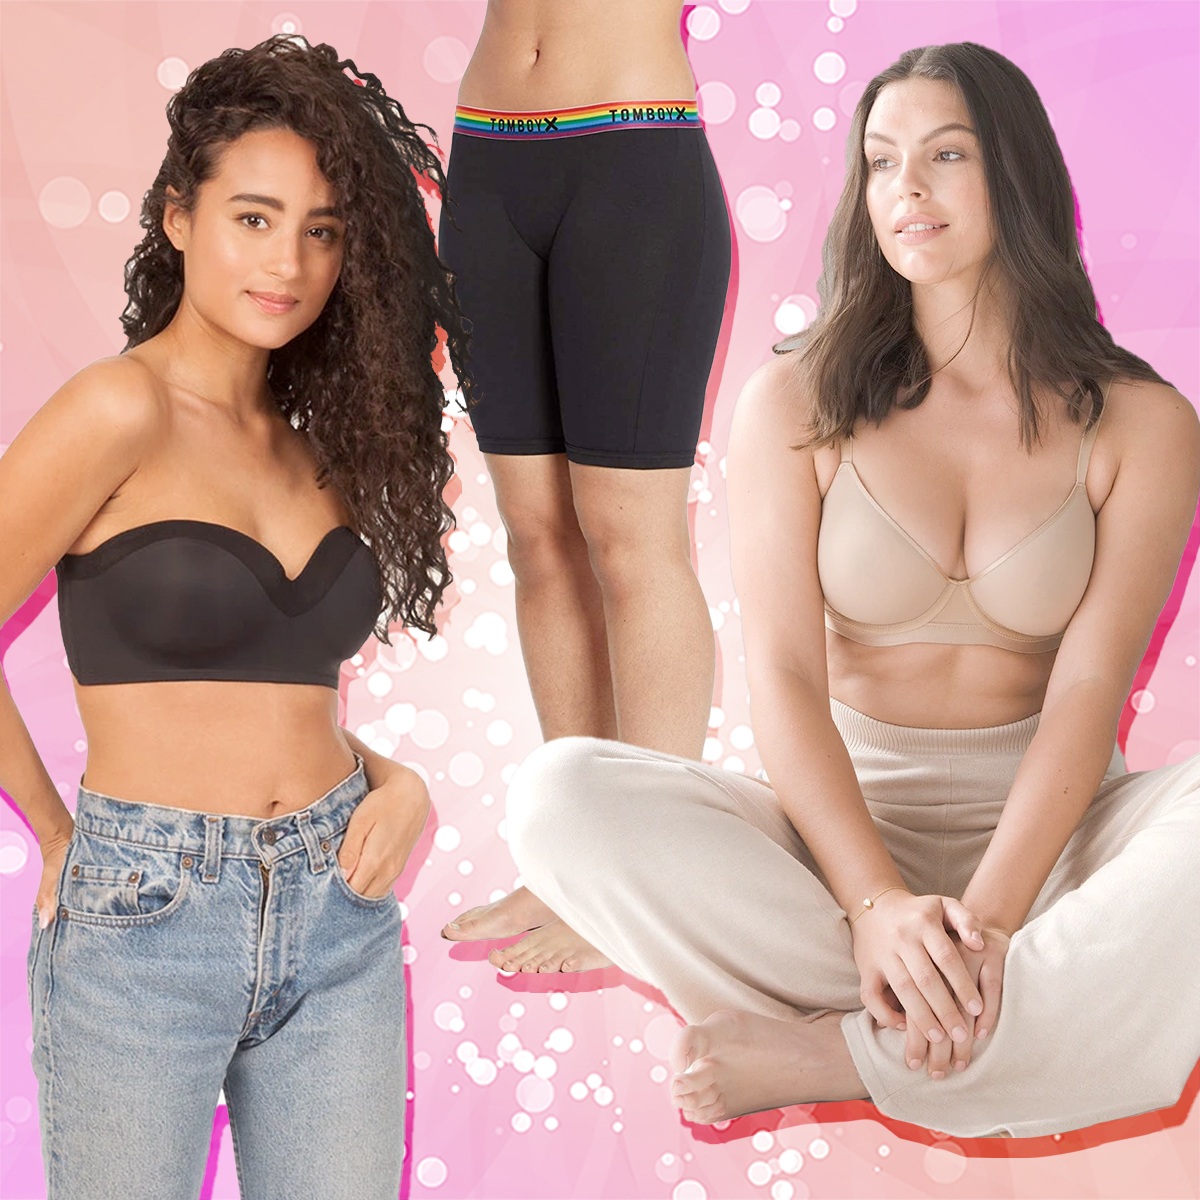 The Best Sites to Buy Underwear and Lingerie